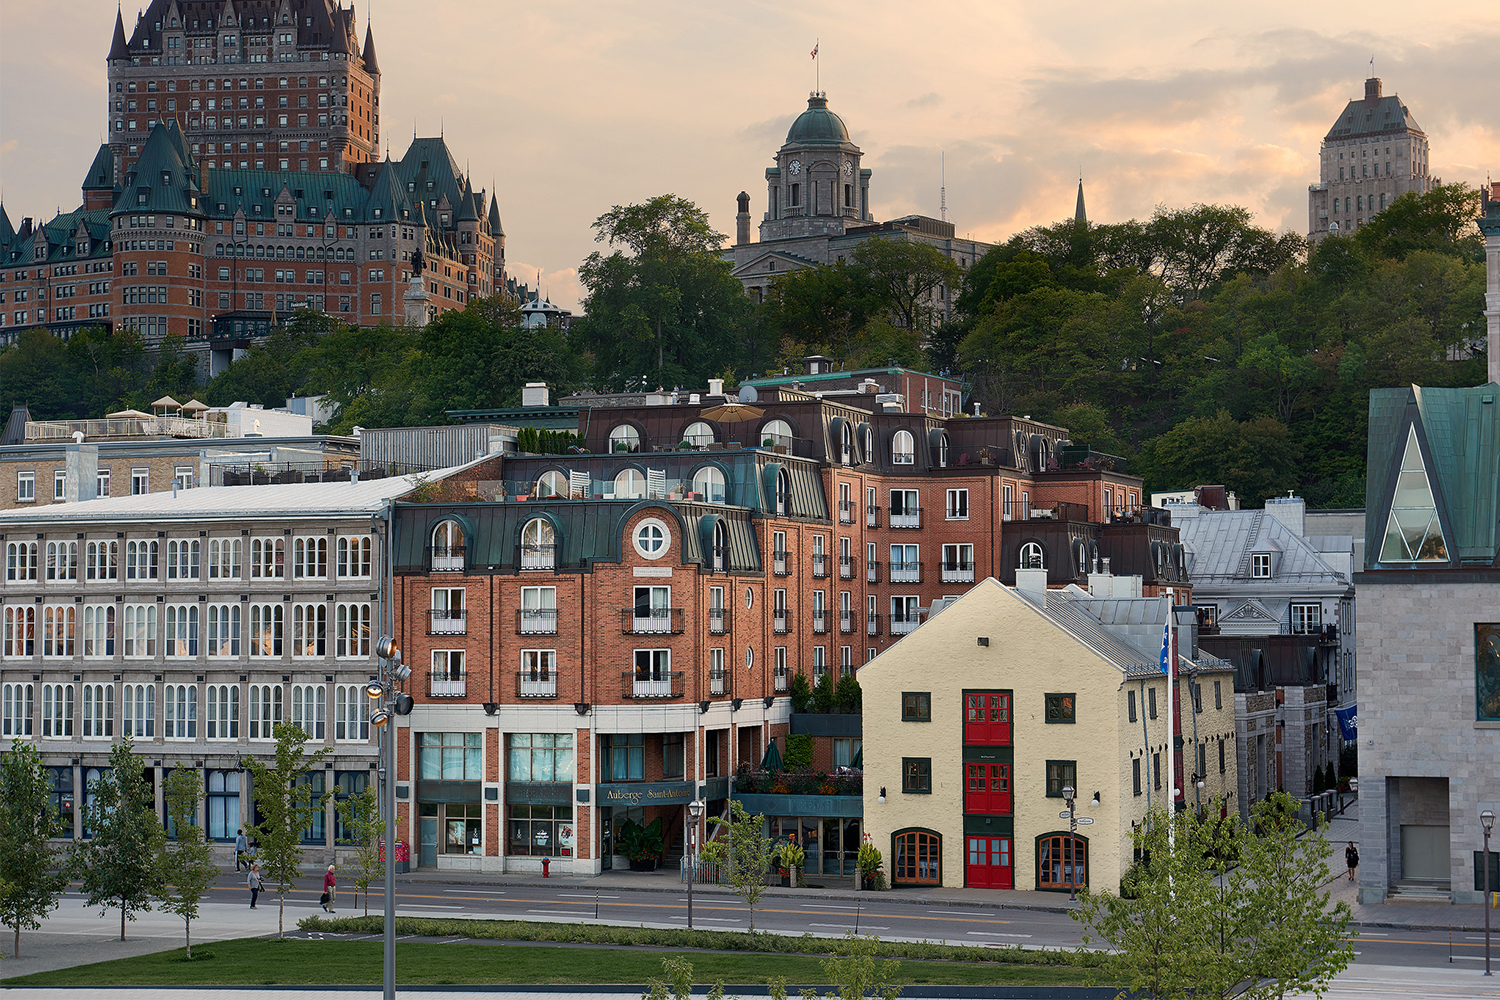 Auberge Saint-Antoine, in the foreground, is the boutique hotel to stay at in Quebec City